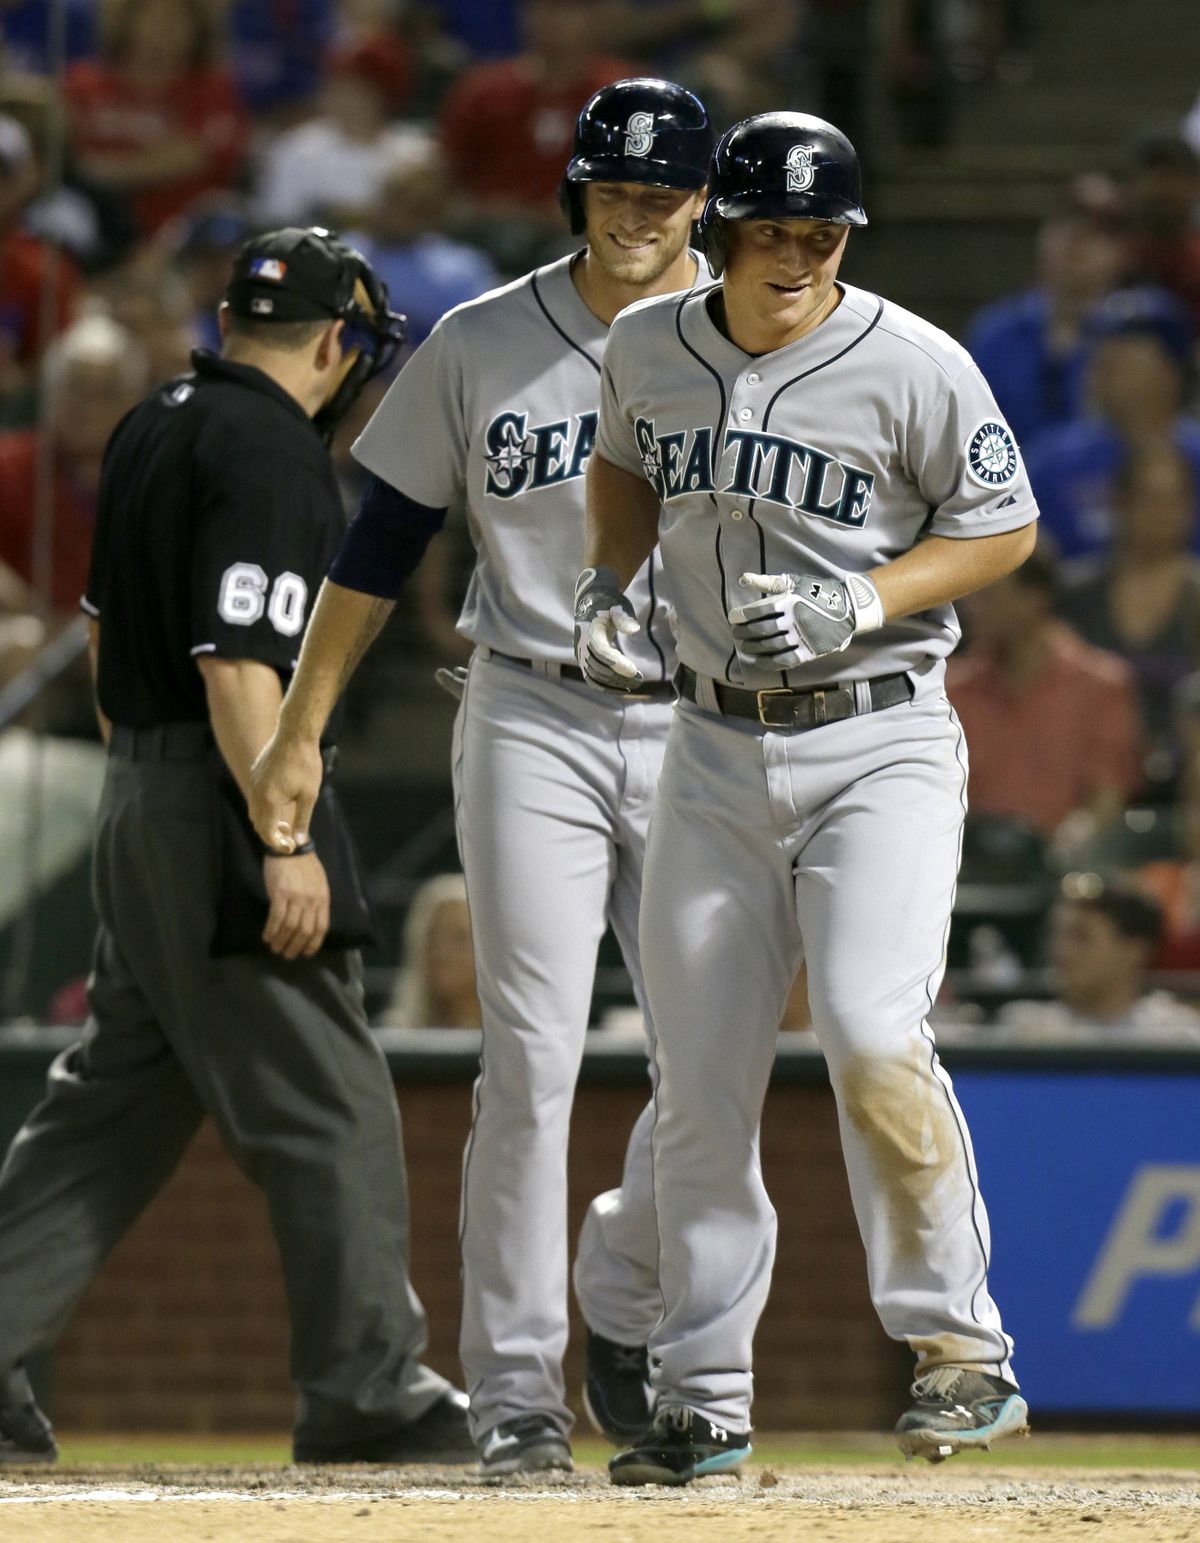 Mariners’ Kyle Seager has five hits in his last two games. (Associated Press)